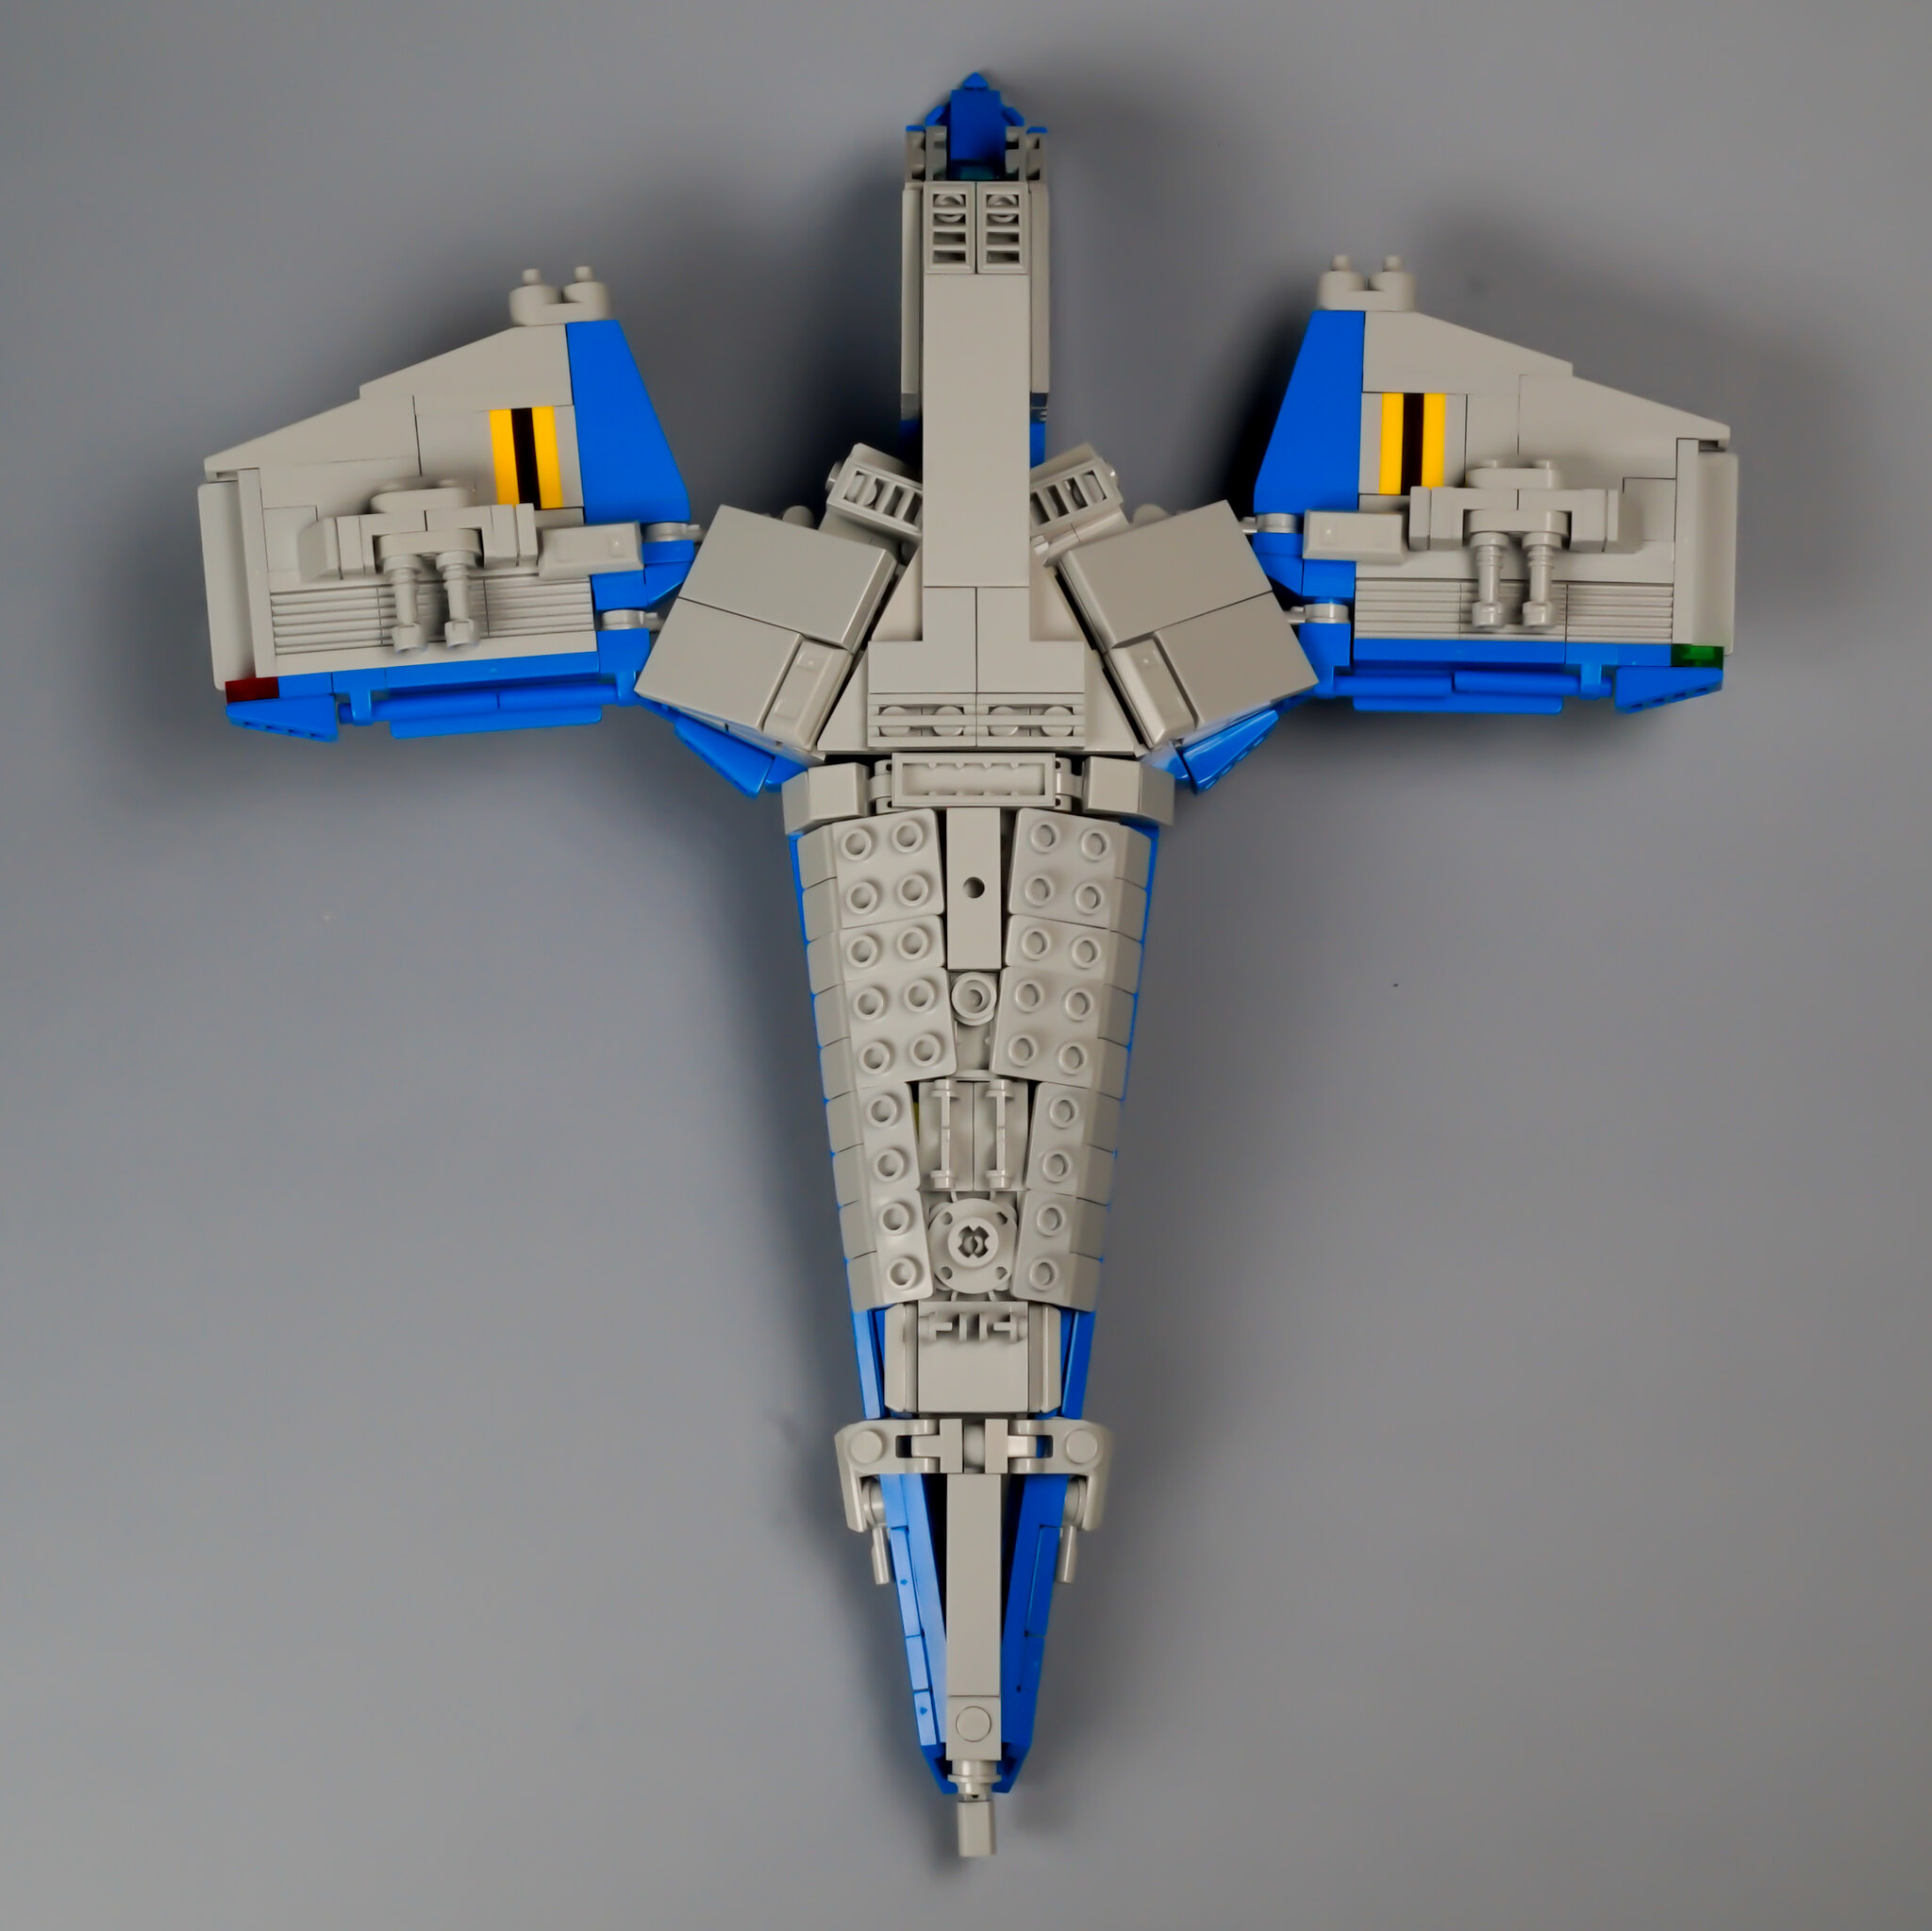 LEGO Spaceship Archives - The Brothers Brick | The Brothers Brick